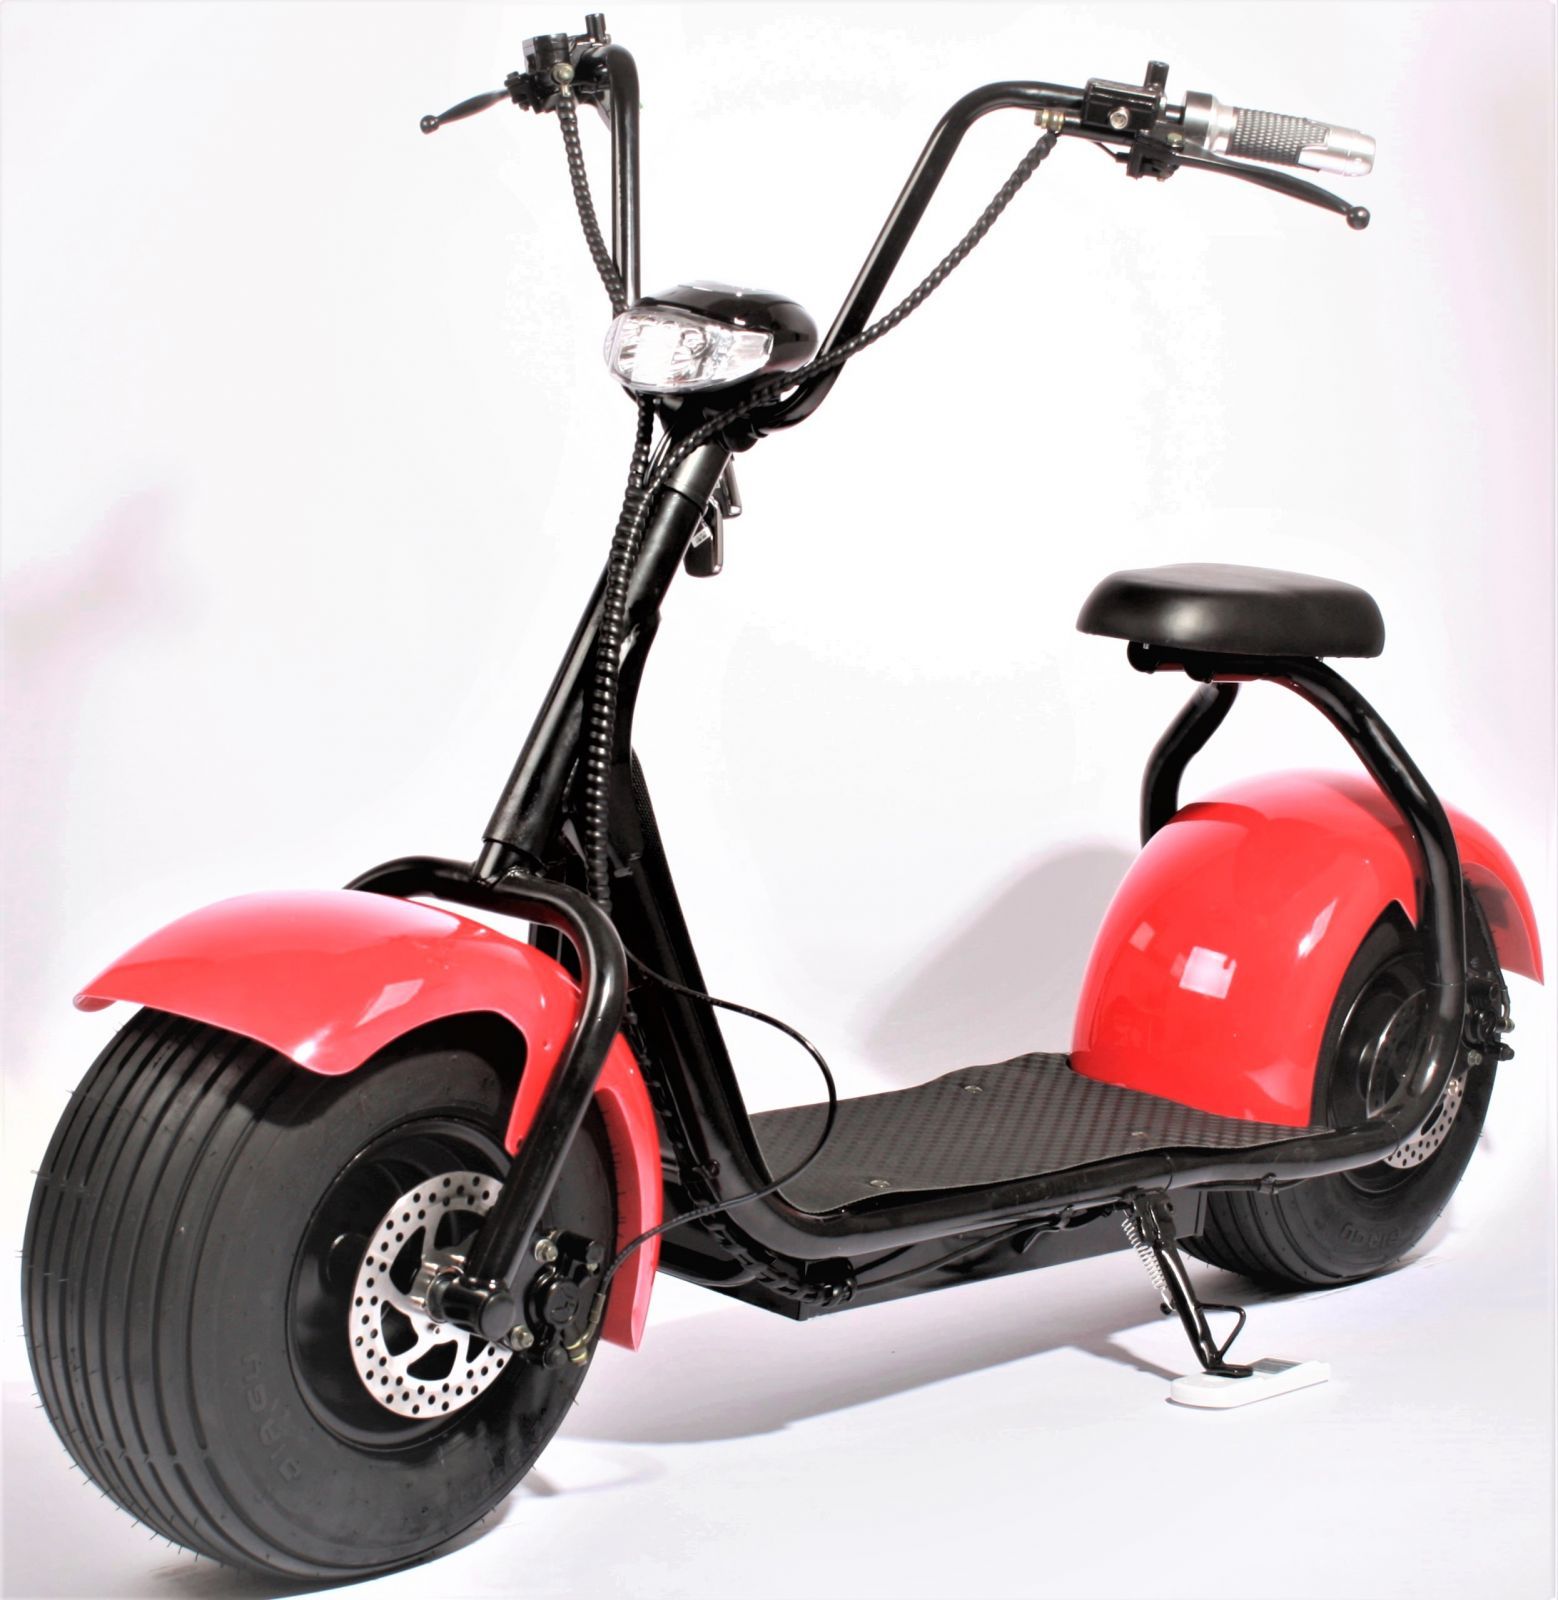 RCskladem ECO HIGHWAY Scooter 1000W ARTR 1:1 A290red red